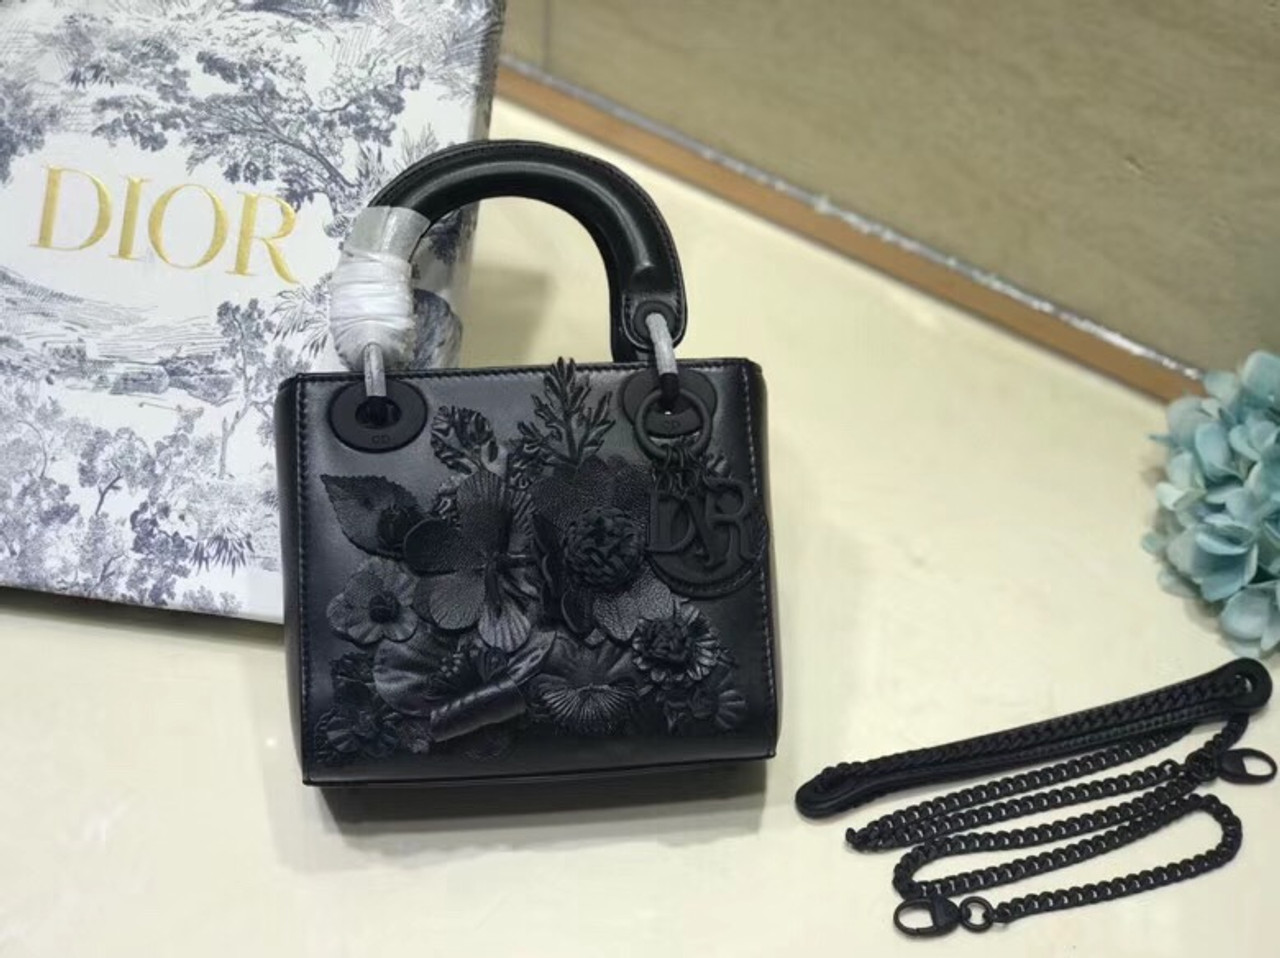 lady dior embroidered bag 2019